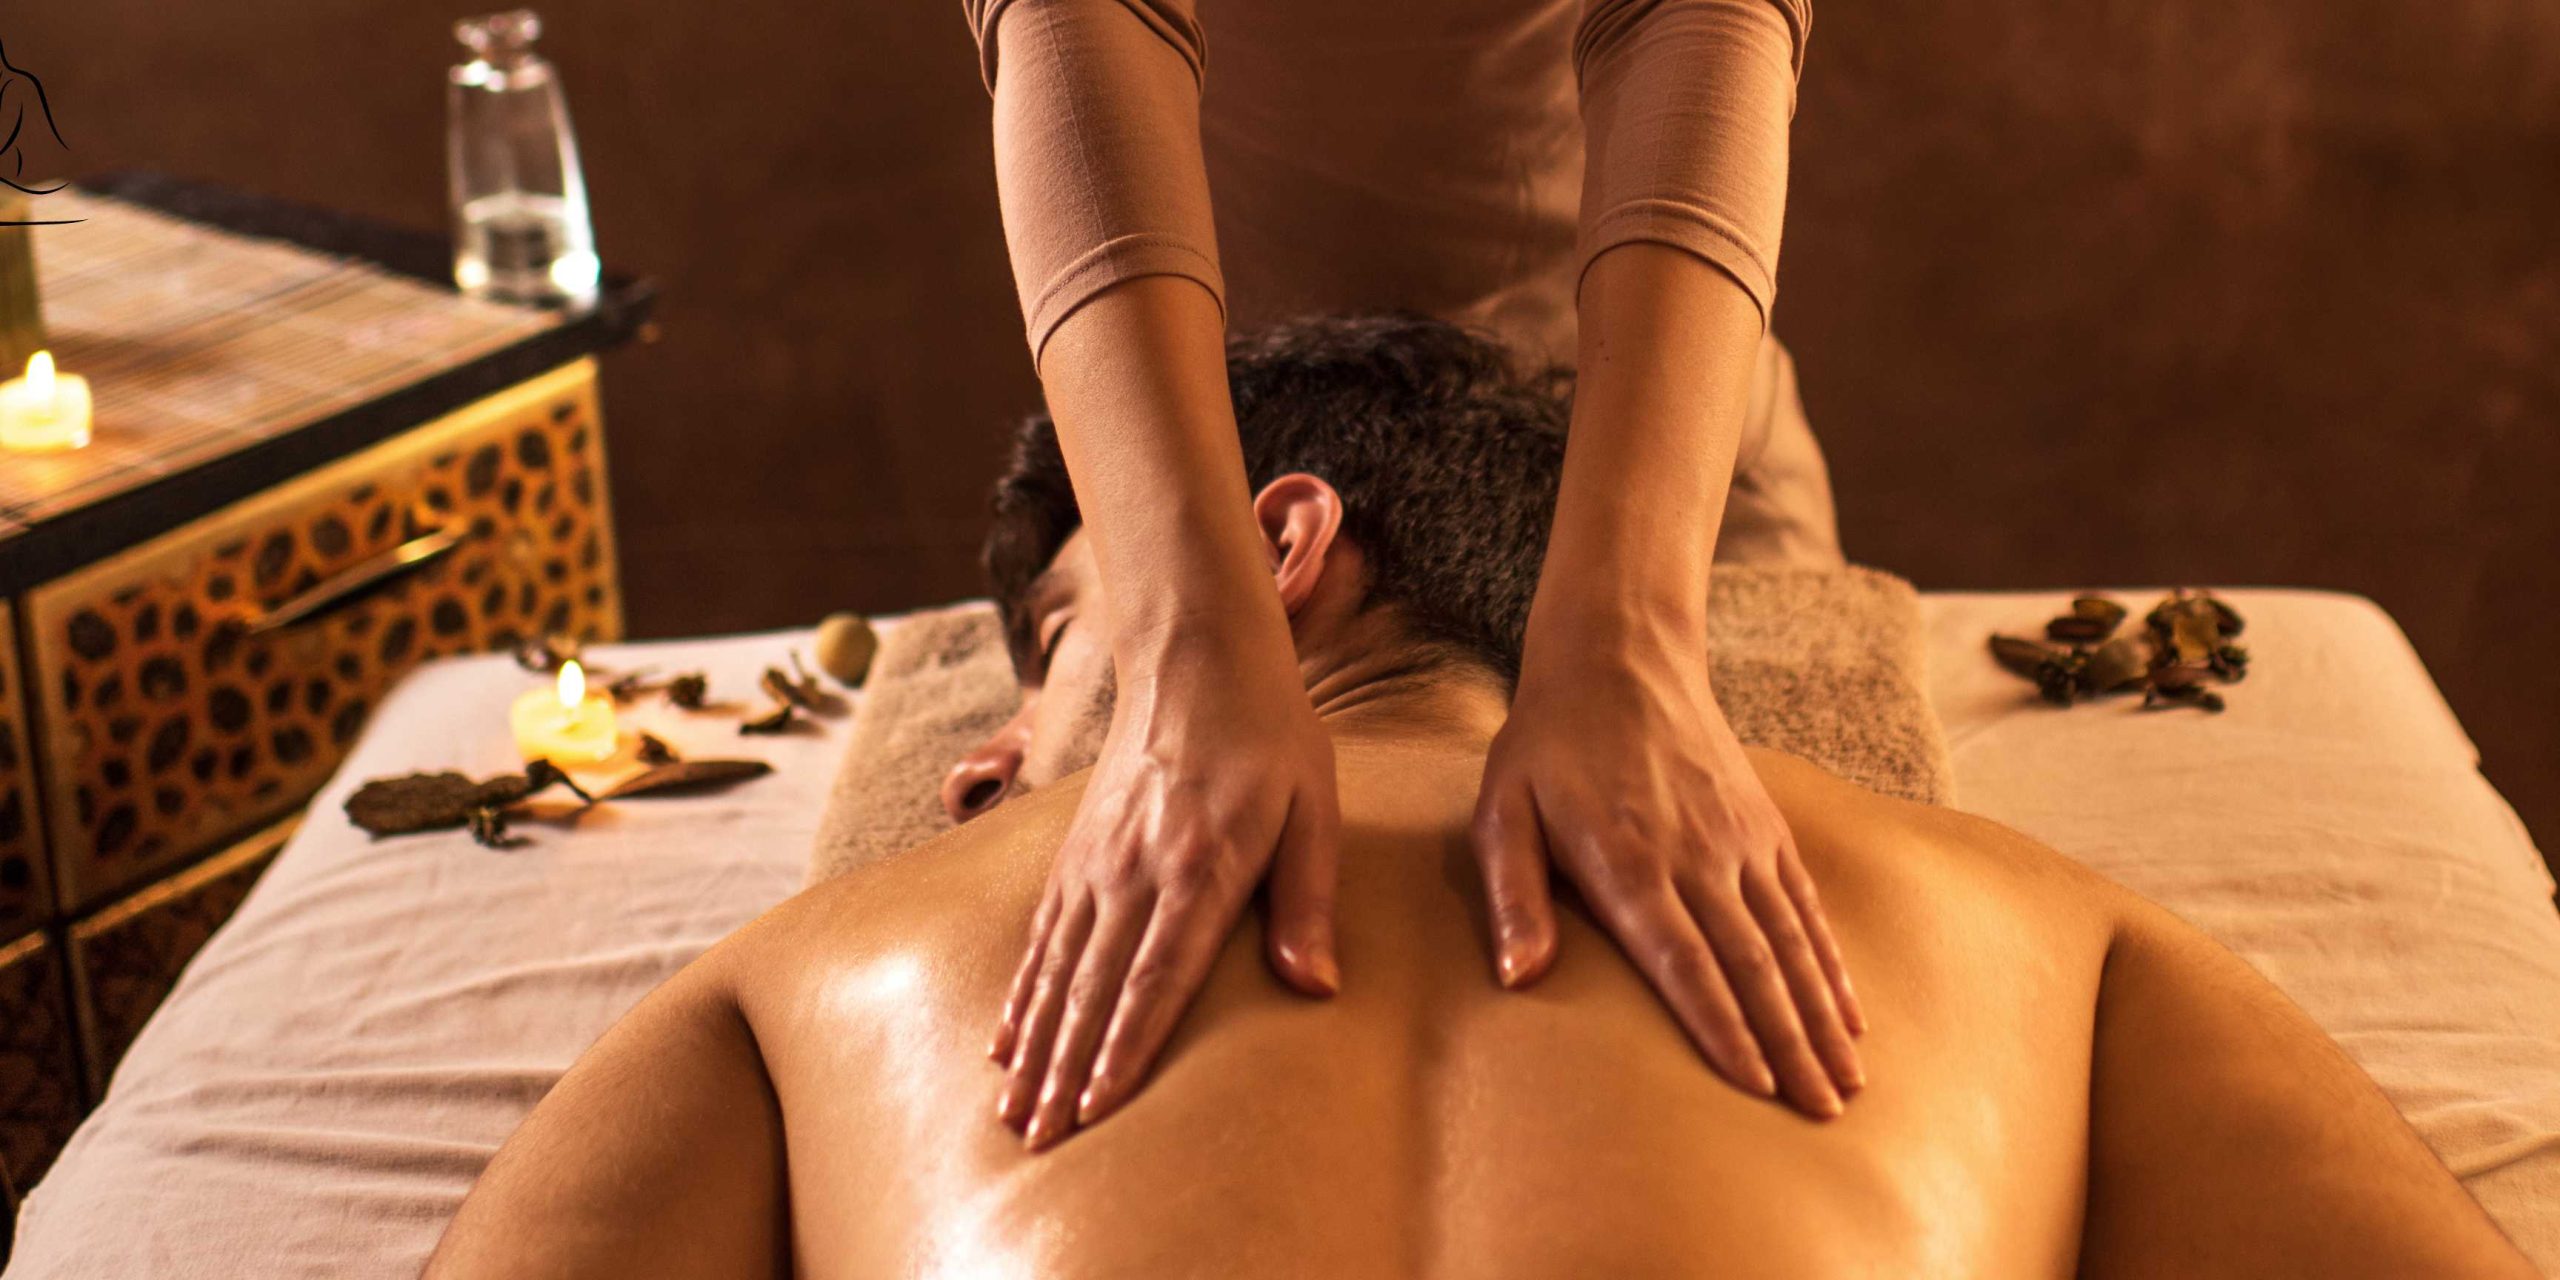 Exploring the Tantric Couples Massage